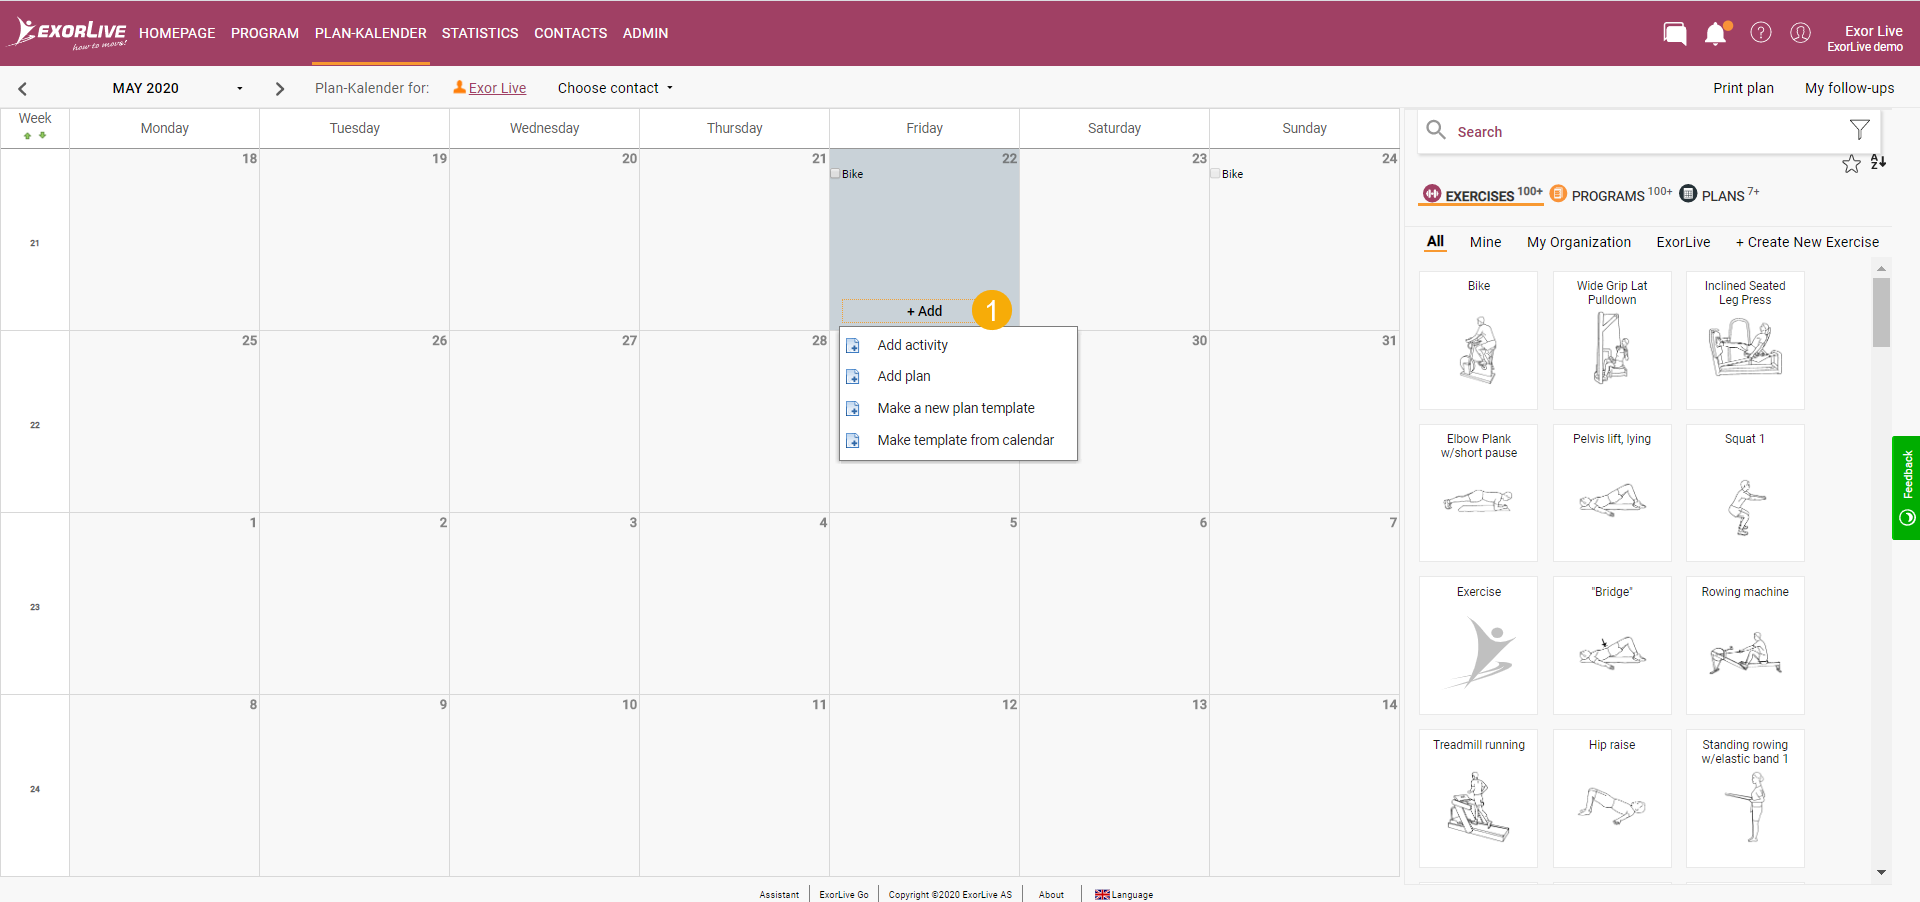 Finding_and_adding_exercises__programs_and_plans_to_the_calendar_Engelsk_4.png